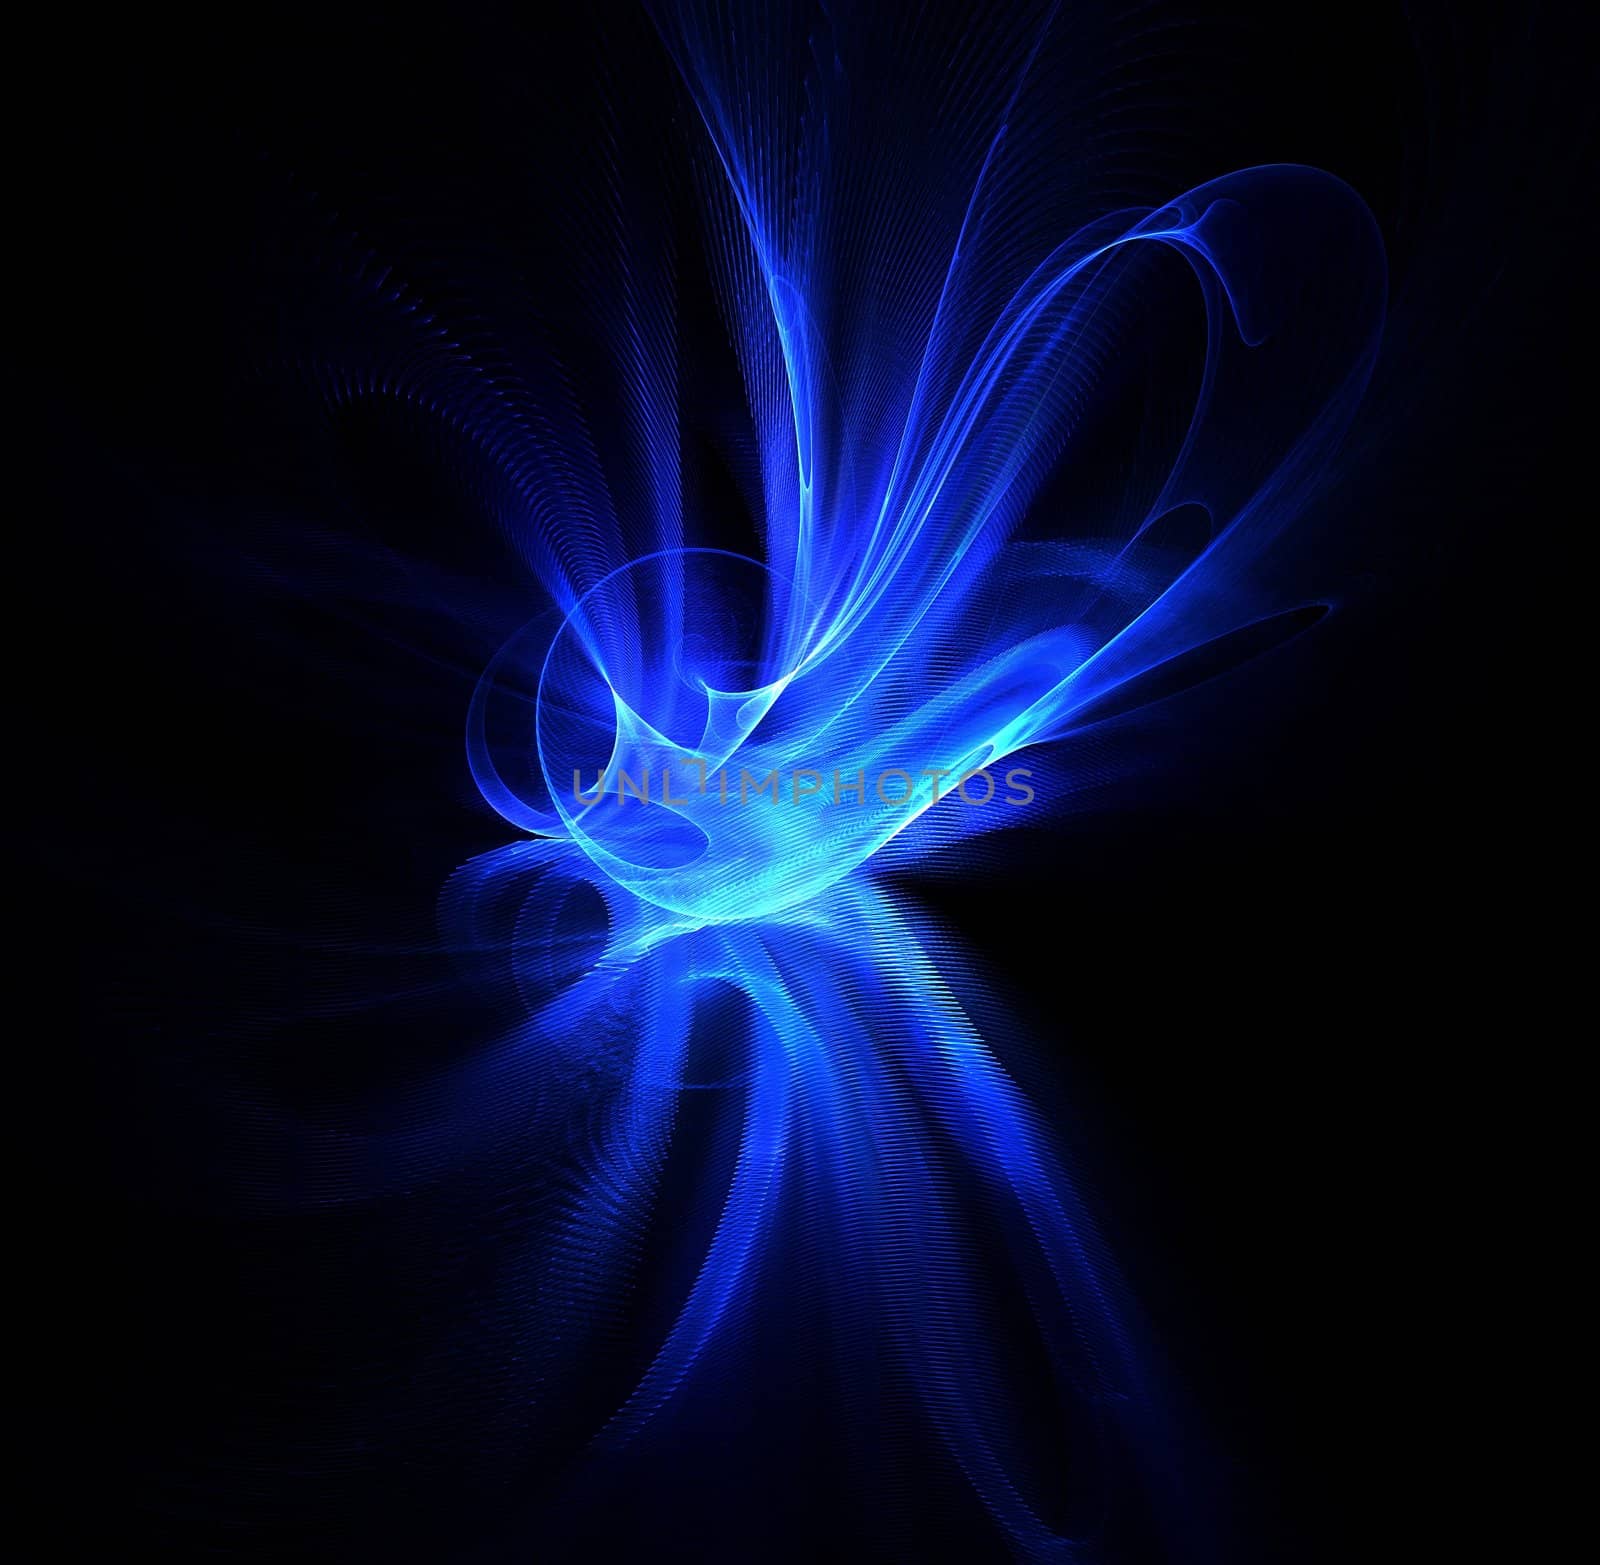 abstract blue flame background 1 by peromarketing